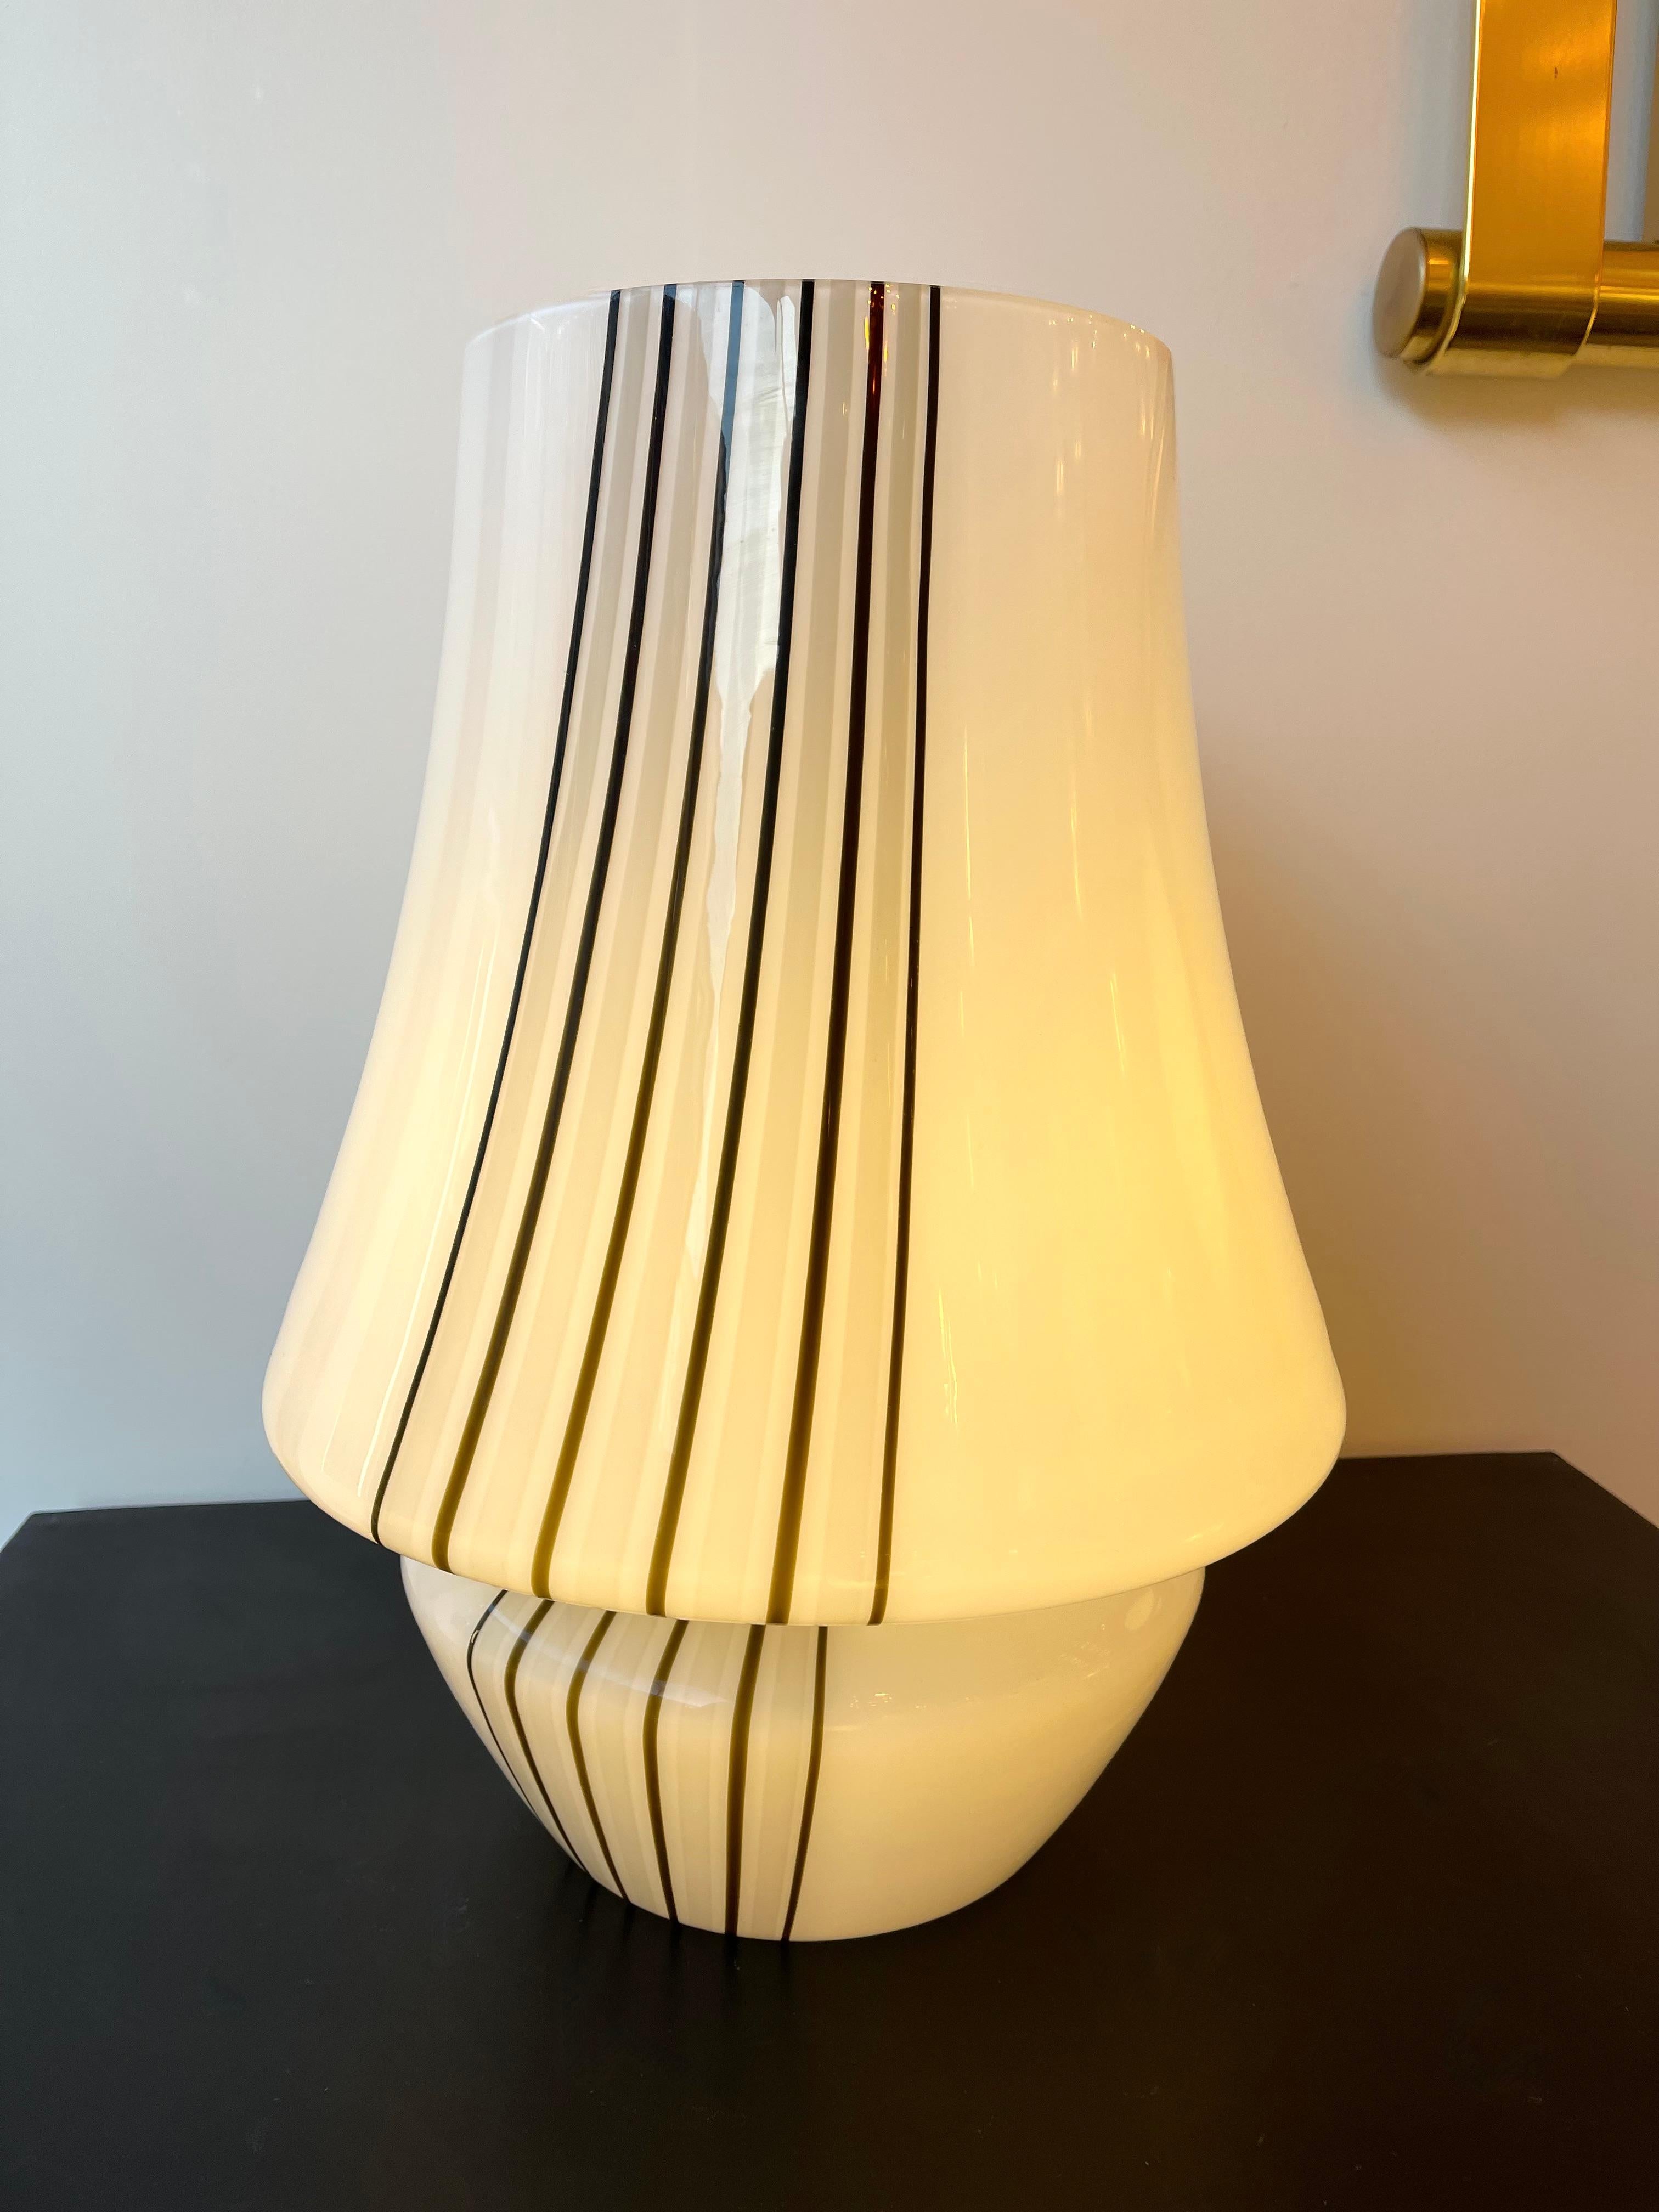 Pair of Large Stripe Murano Glass Lamps, Italy, 1970s For Sale 4